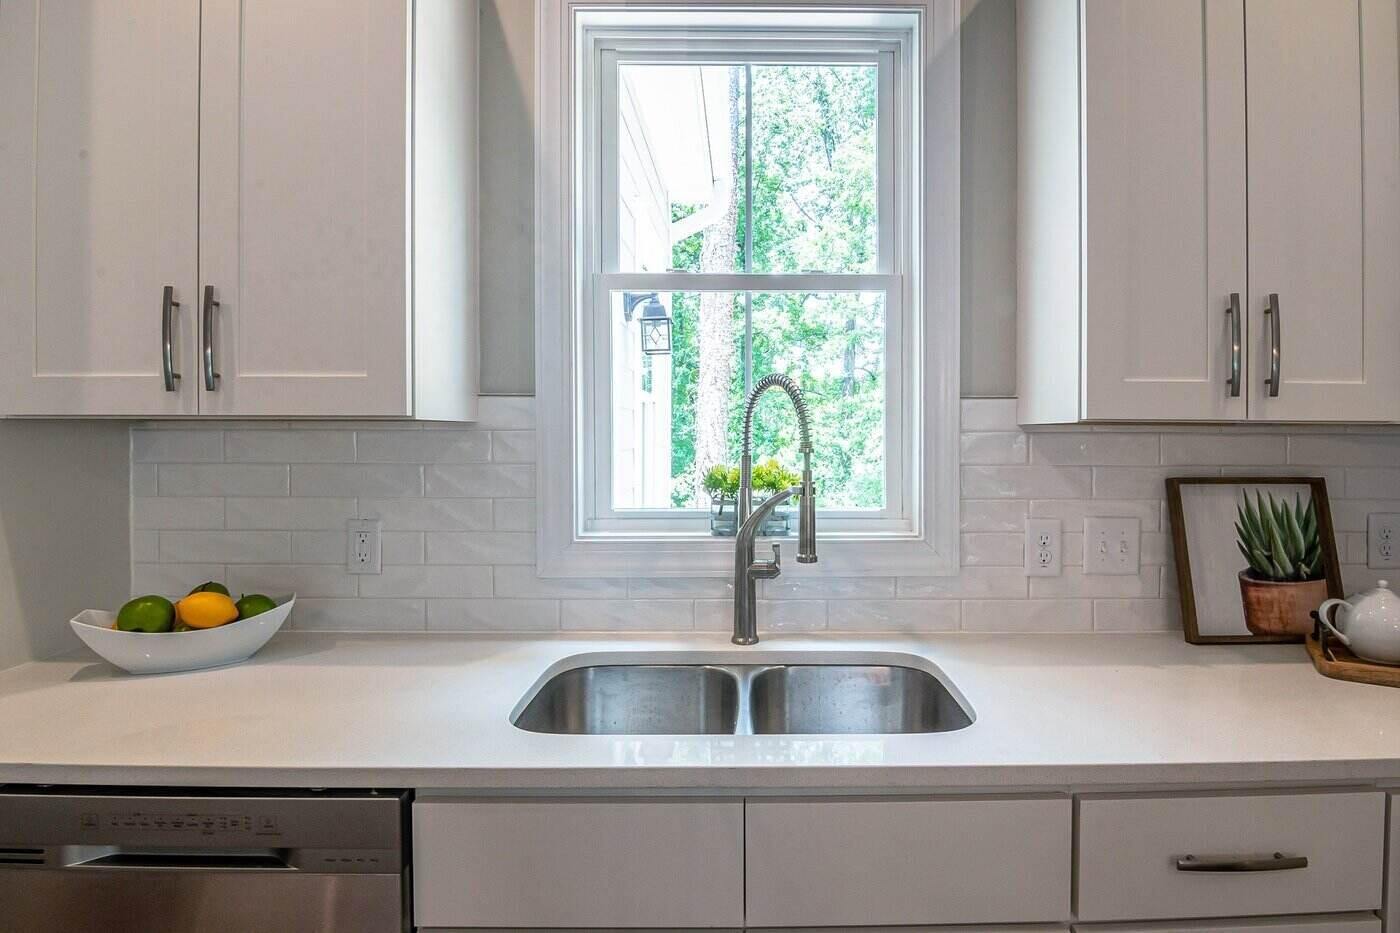 window flanked by kitchen cabinets - eco-friendly kitchen cabinets